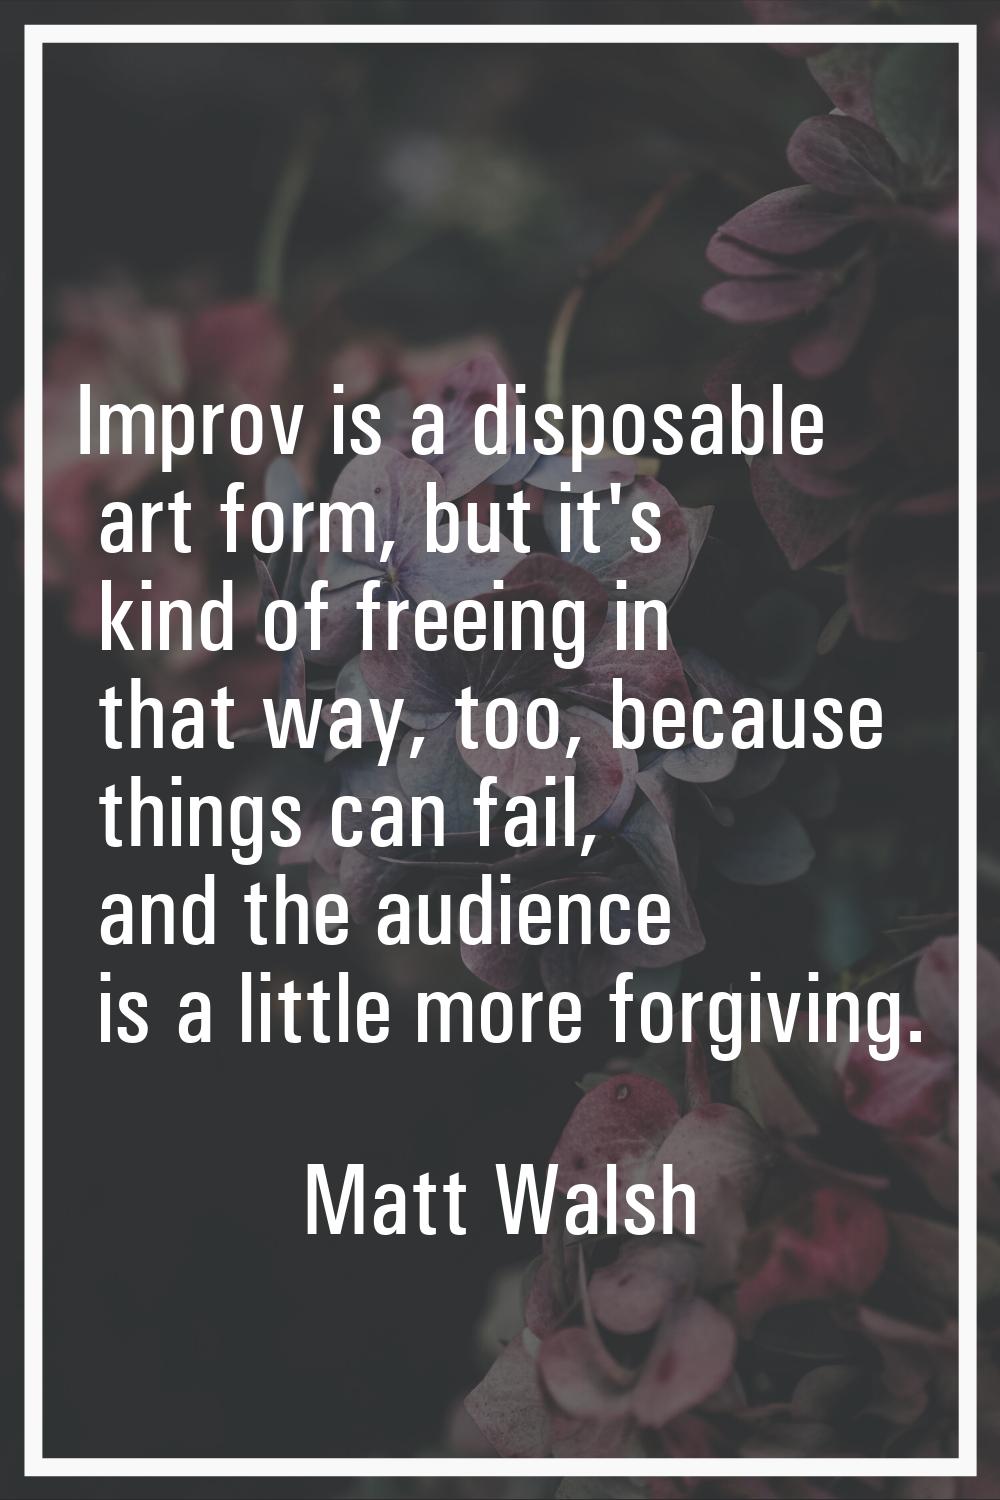 Improv is a disposable art form, but it's kind of freeing in that way, too, because things can fail